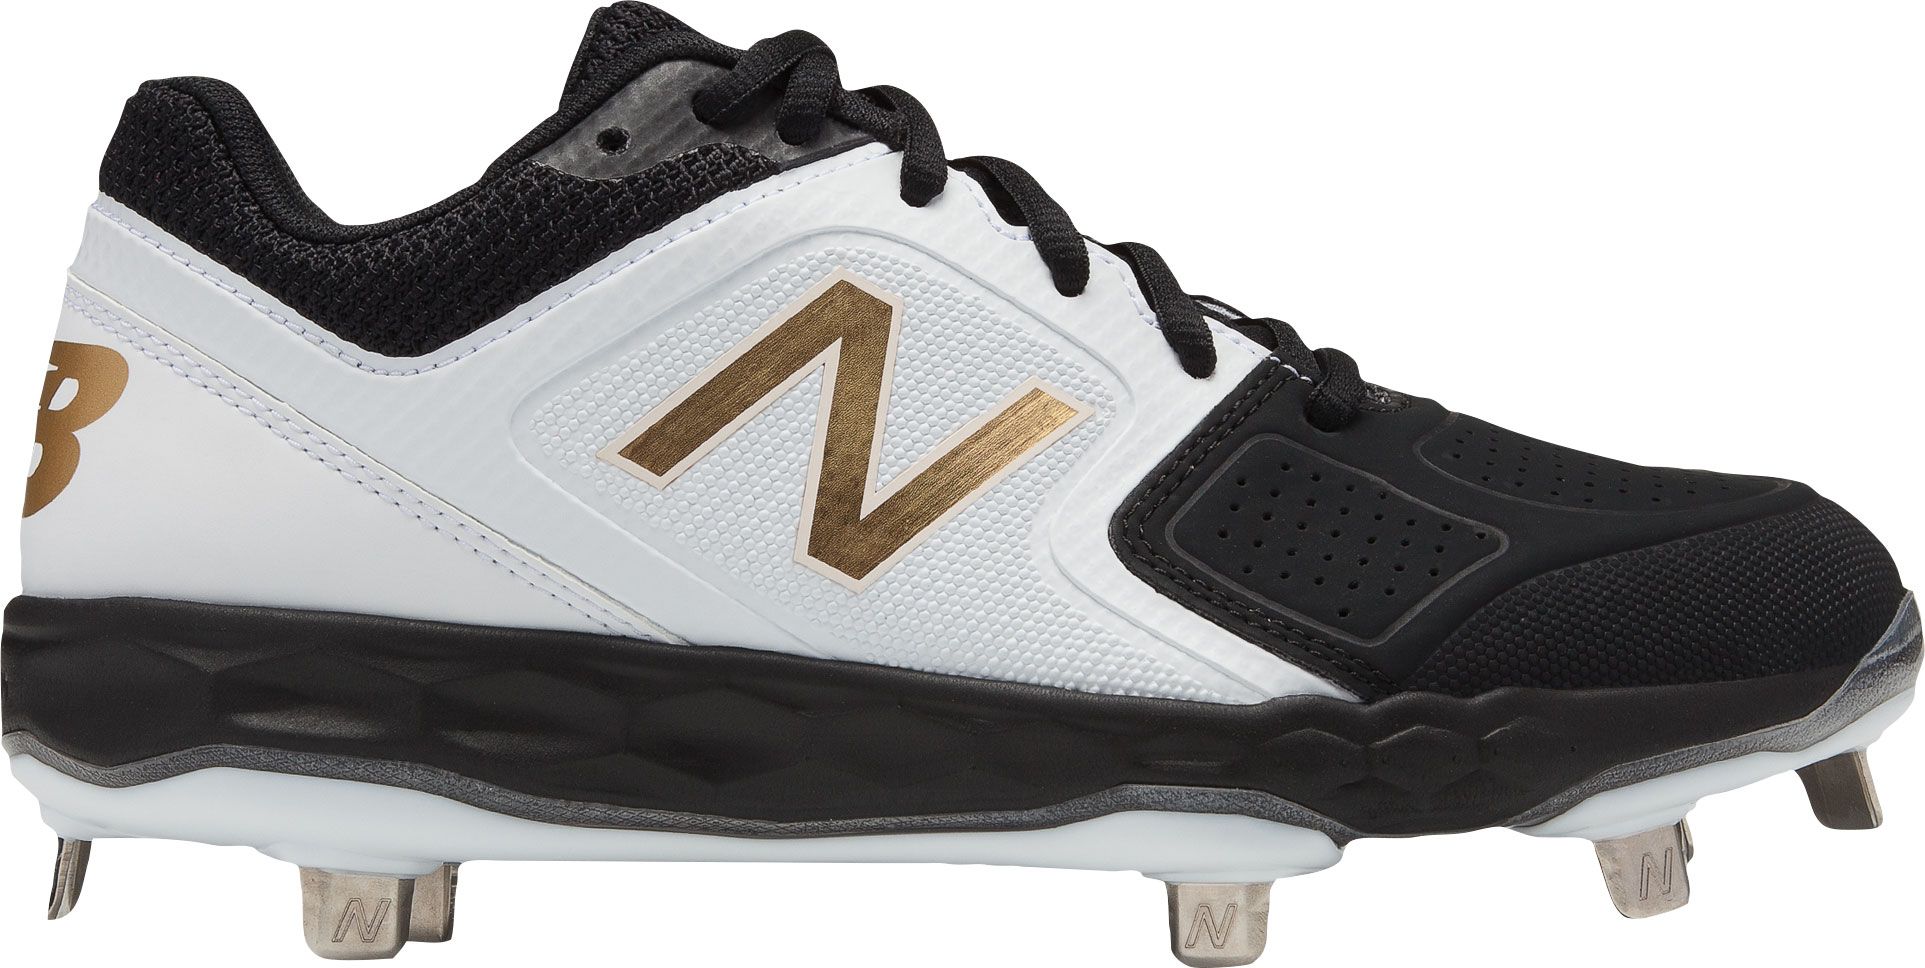 black and gold softball cleats